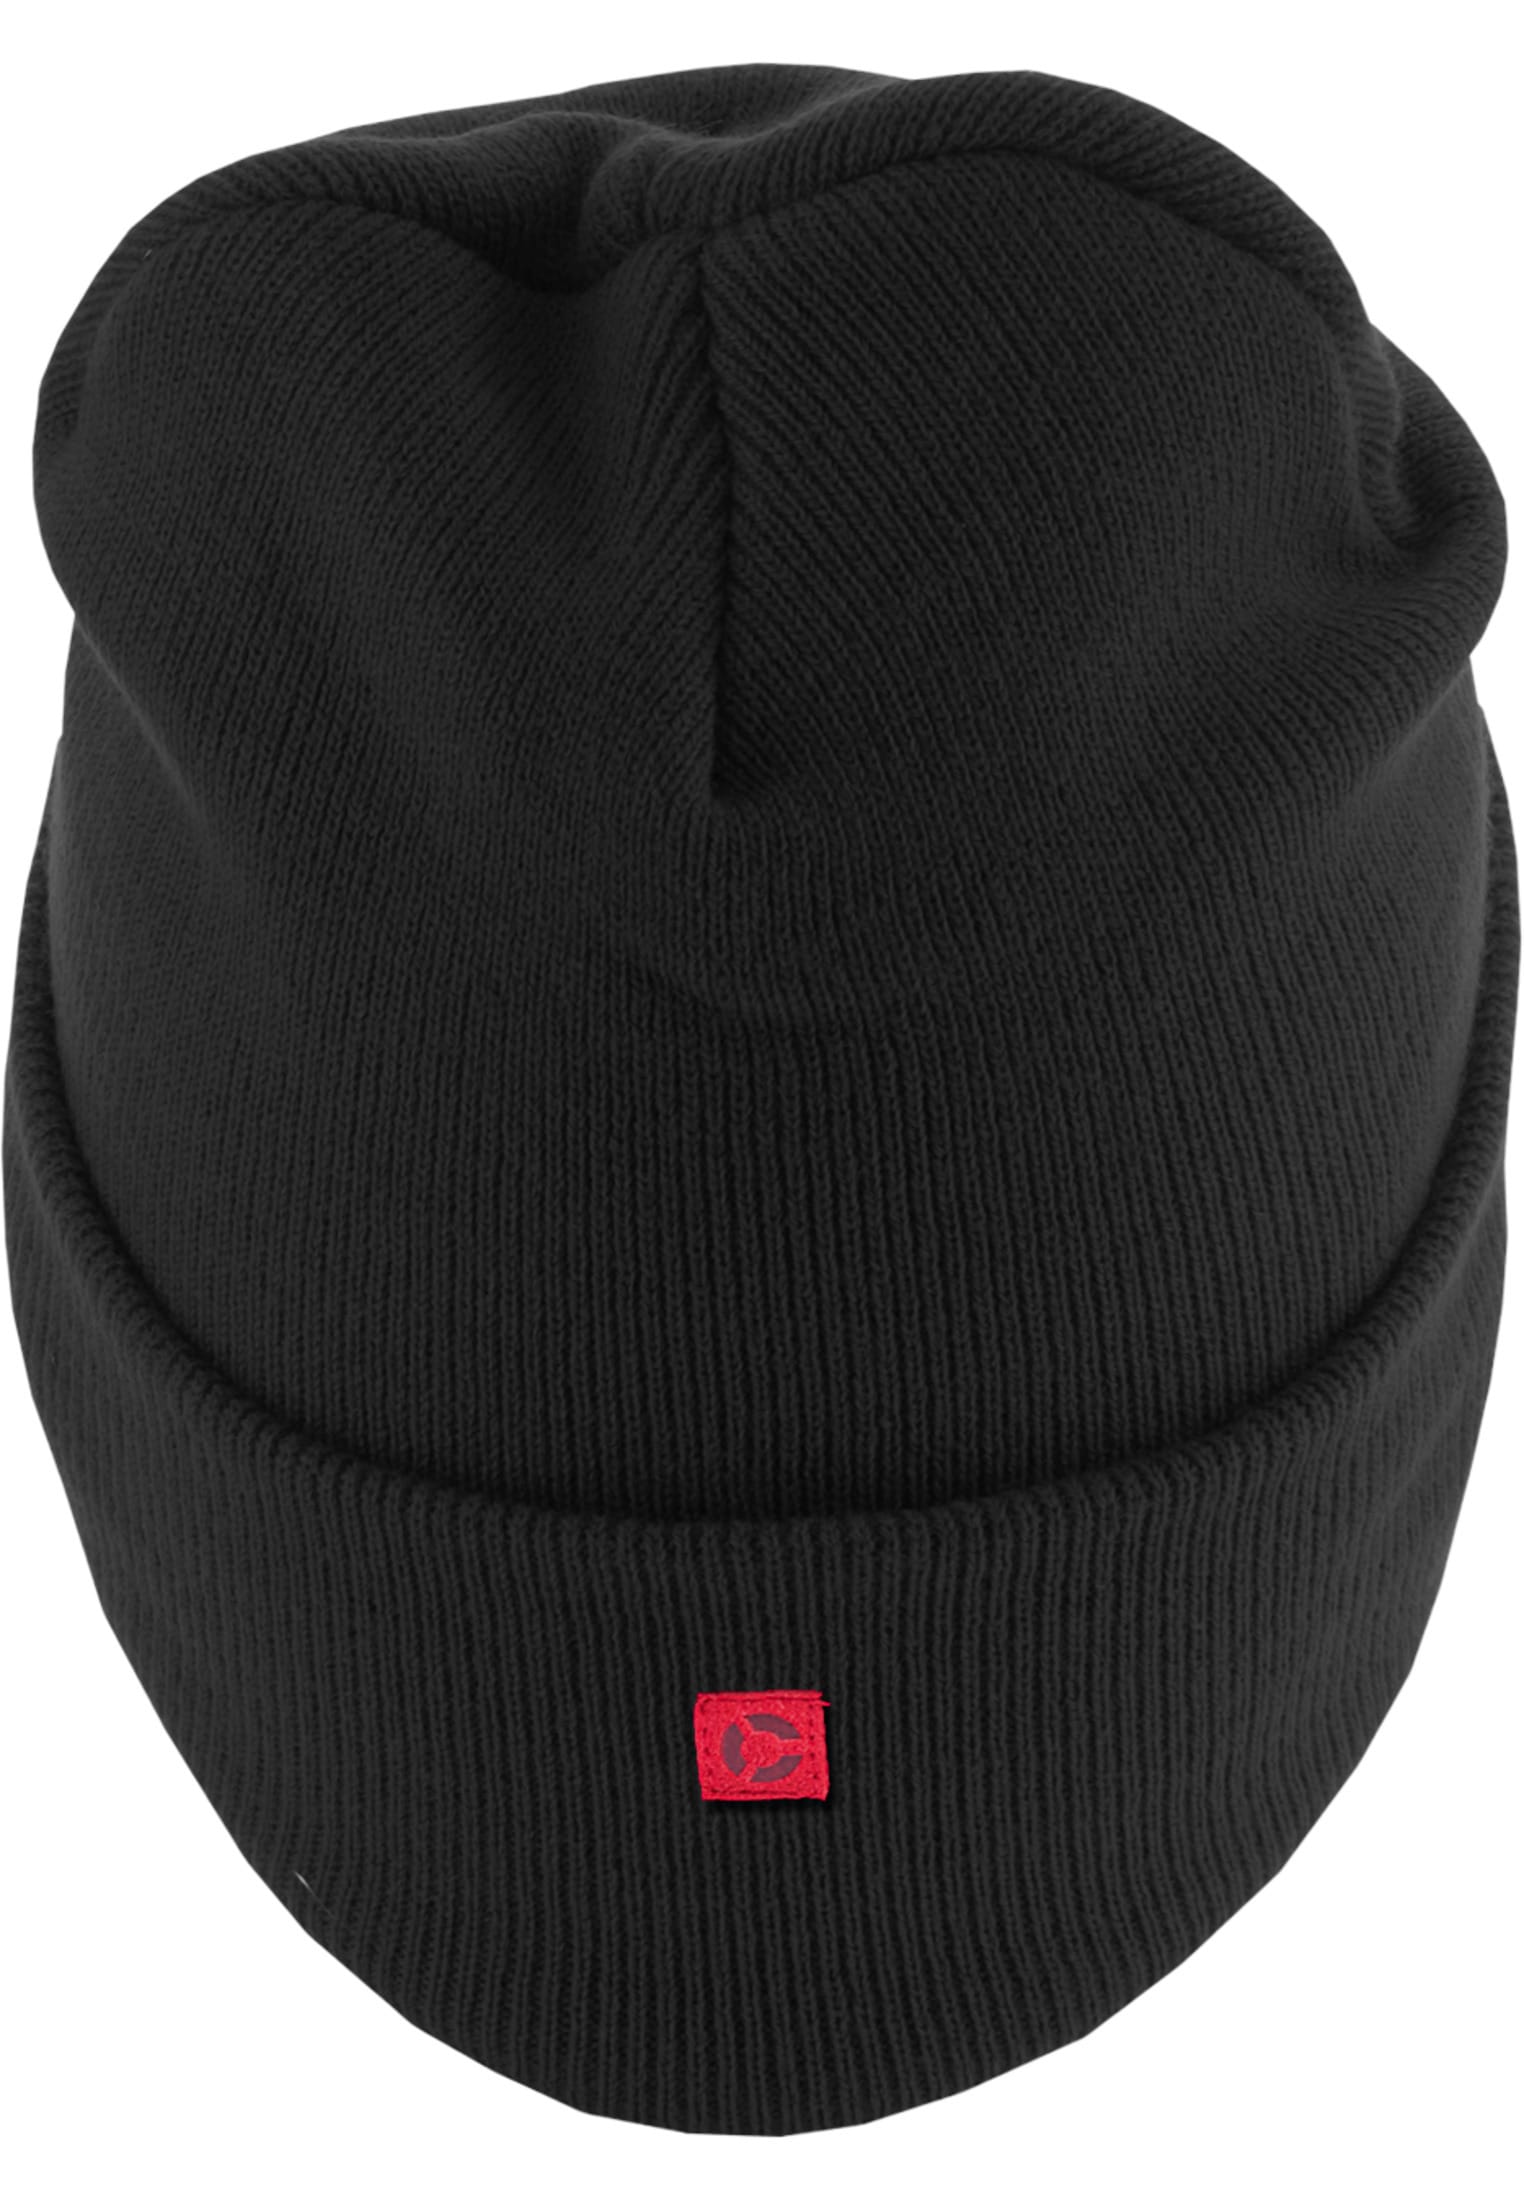 MSTRDS Beanie »Accessoires Letter Cuff Knit Beanie«, (1 St.) | I'm walking